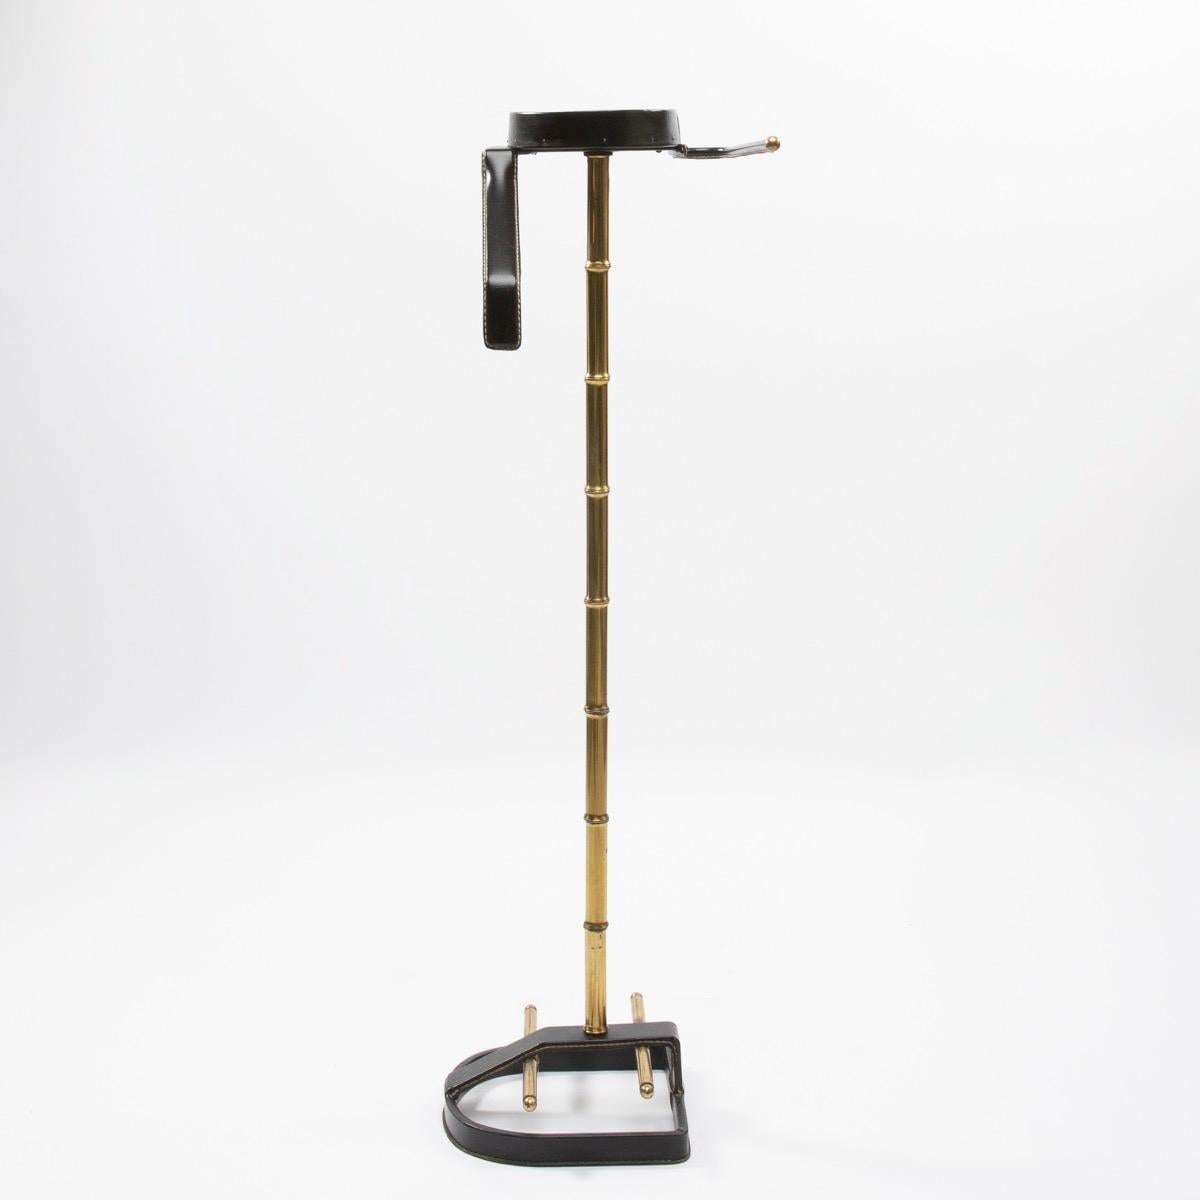 A valet by Jacques Adnet, (France), circa 1950.
Beautiful saddle stitched black leather work on a steel frame with brass accents (faux bambou central shaft).

Jacques Edouard Jules Adnet was born in Châtillon-Coligny France in 1900 and died in